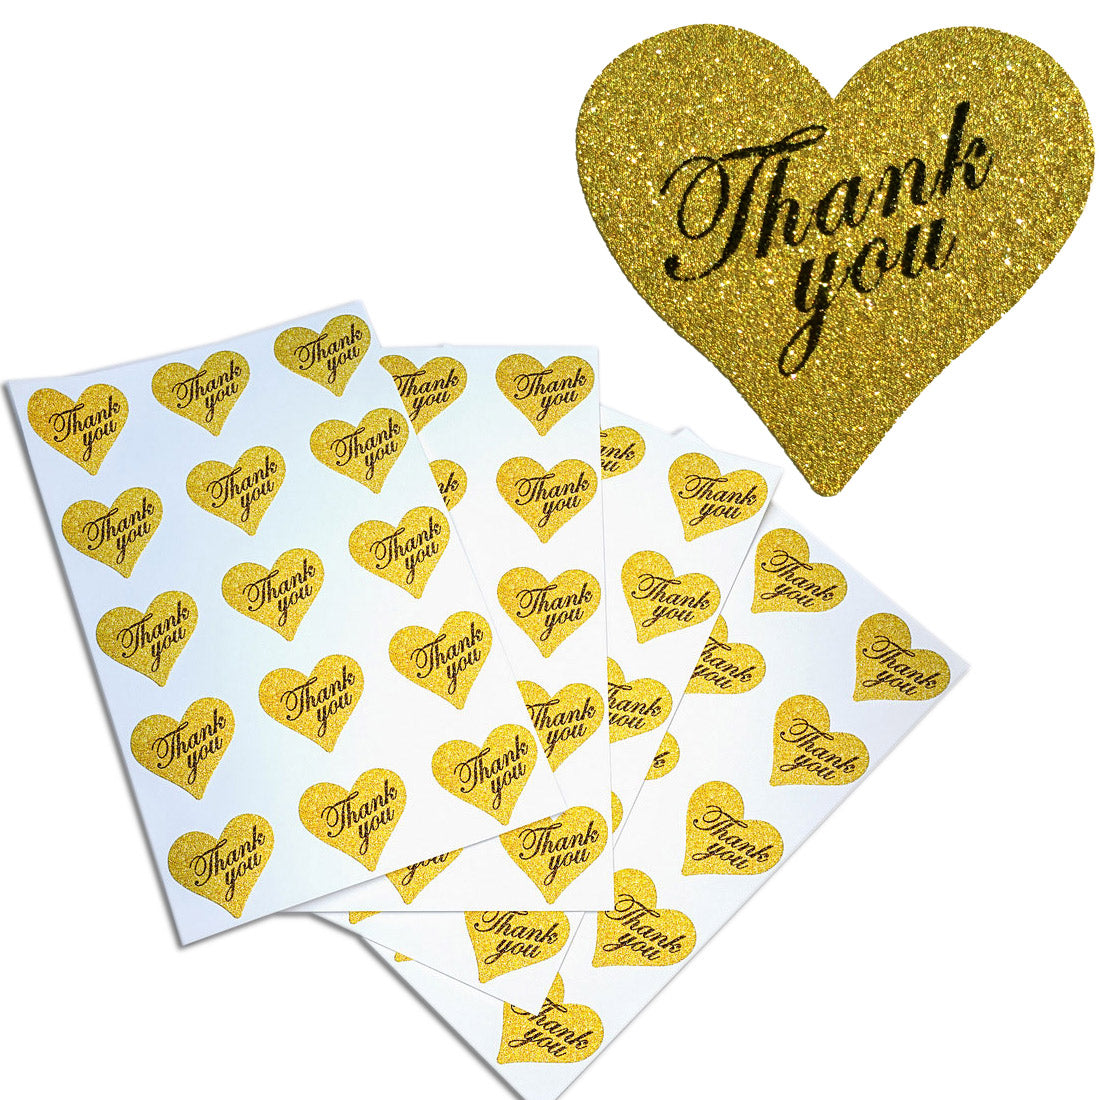 Envelope Seals Gold Hearts, Heart shaped label, One size by Royal